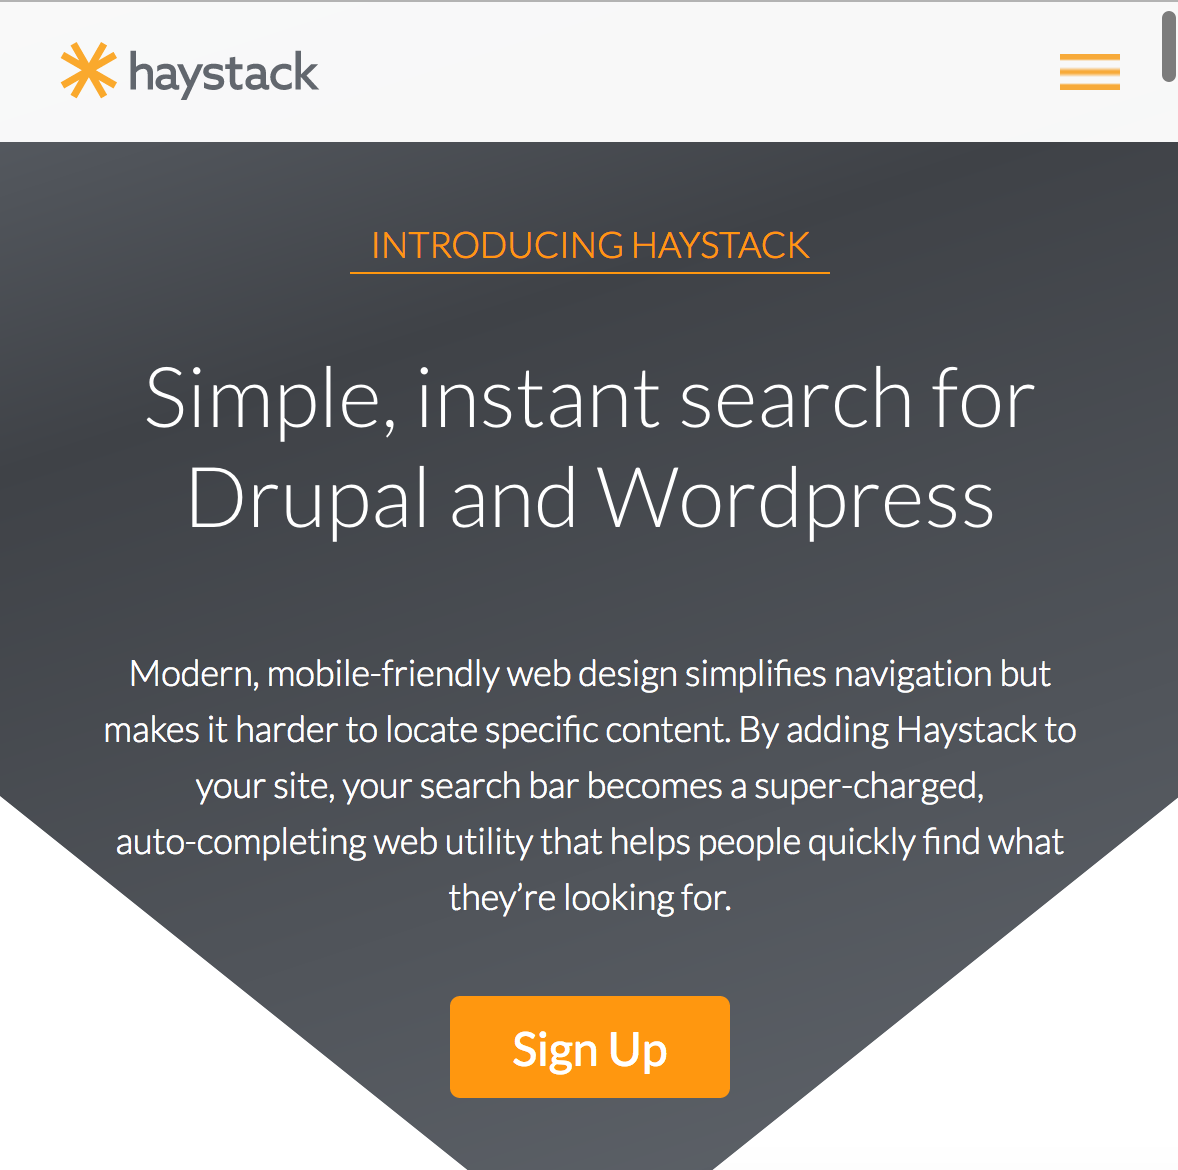 Go to https://haystack.menu/ to get your *license* for the Haystack search